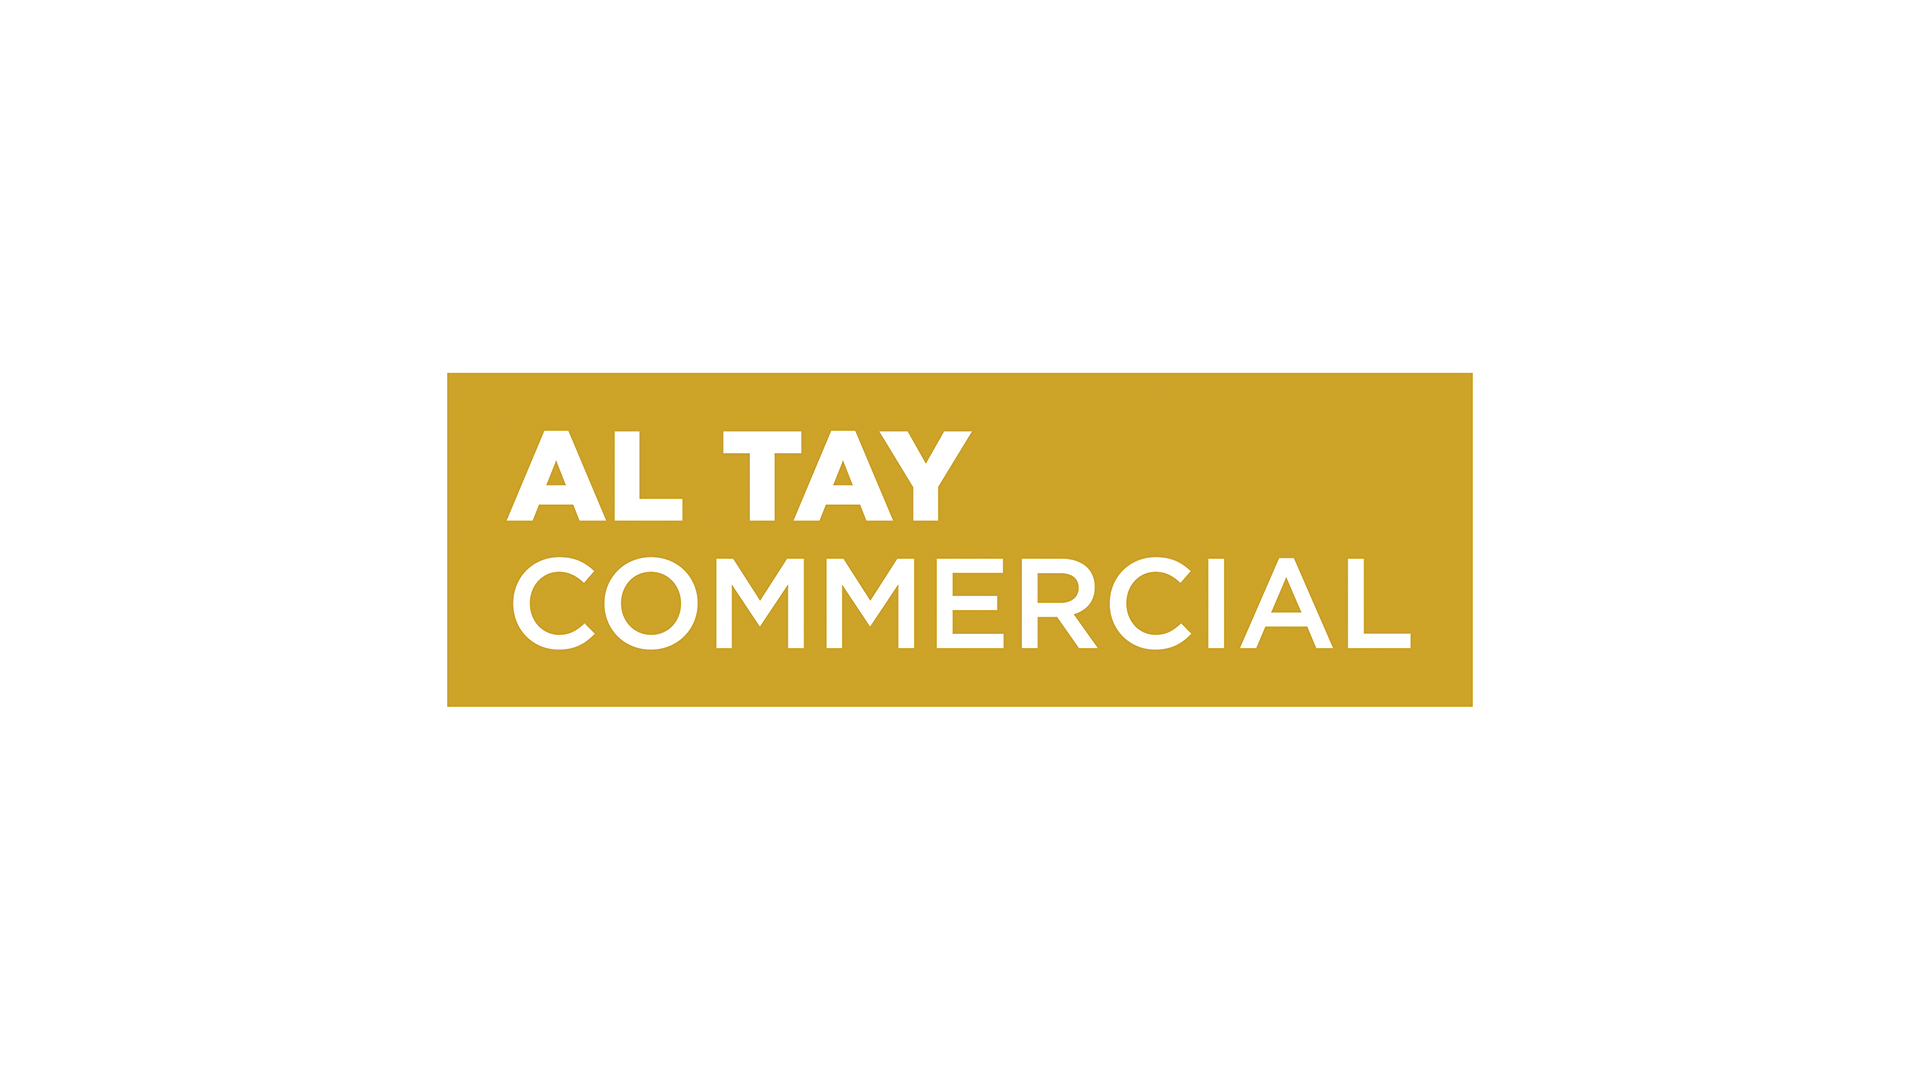 Al tay corporate video shot by Rsn8 Productions